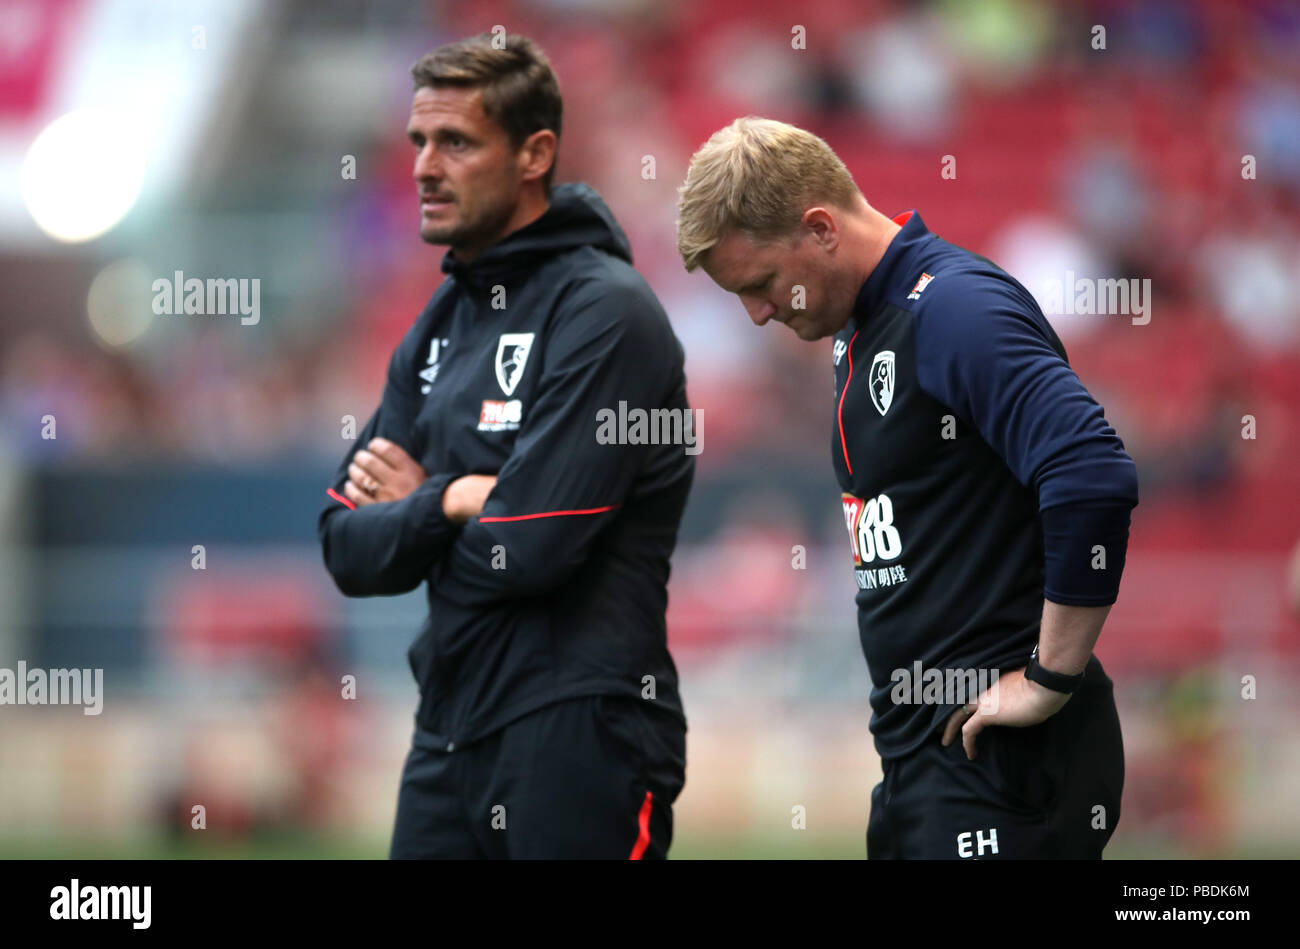 AFC Bournemouth manager Eddie Howe (right) and assistant manager Jason Tindall (left) during a pre-season friendly match at Ashton Gate, Bristol. PRESS ASSOCIATION Photo. Picture date: Friday July 27, 2018. See PA story SOCCER Bristol City. Photo credit should read: Nick Potts/PA Wire. EDITORIAL USE ONLY No use with unauthorised audio, video, data, fixture lists, club/league logos or 'live' services. Online in-match use limited to 75 images, no video emulation. No use in betting, games or single club/league/player publications. Stock Photo